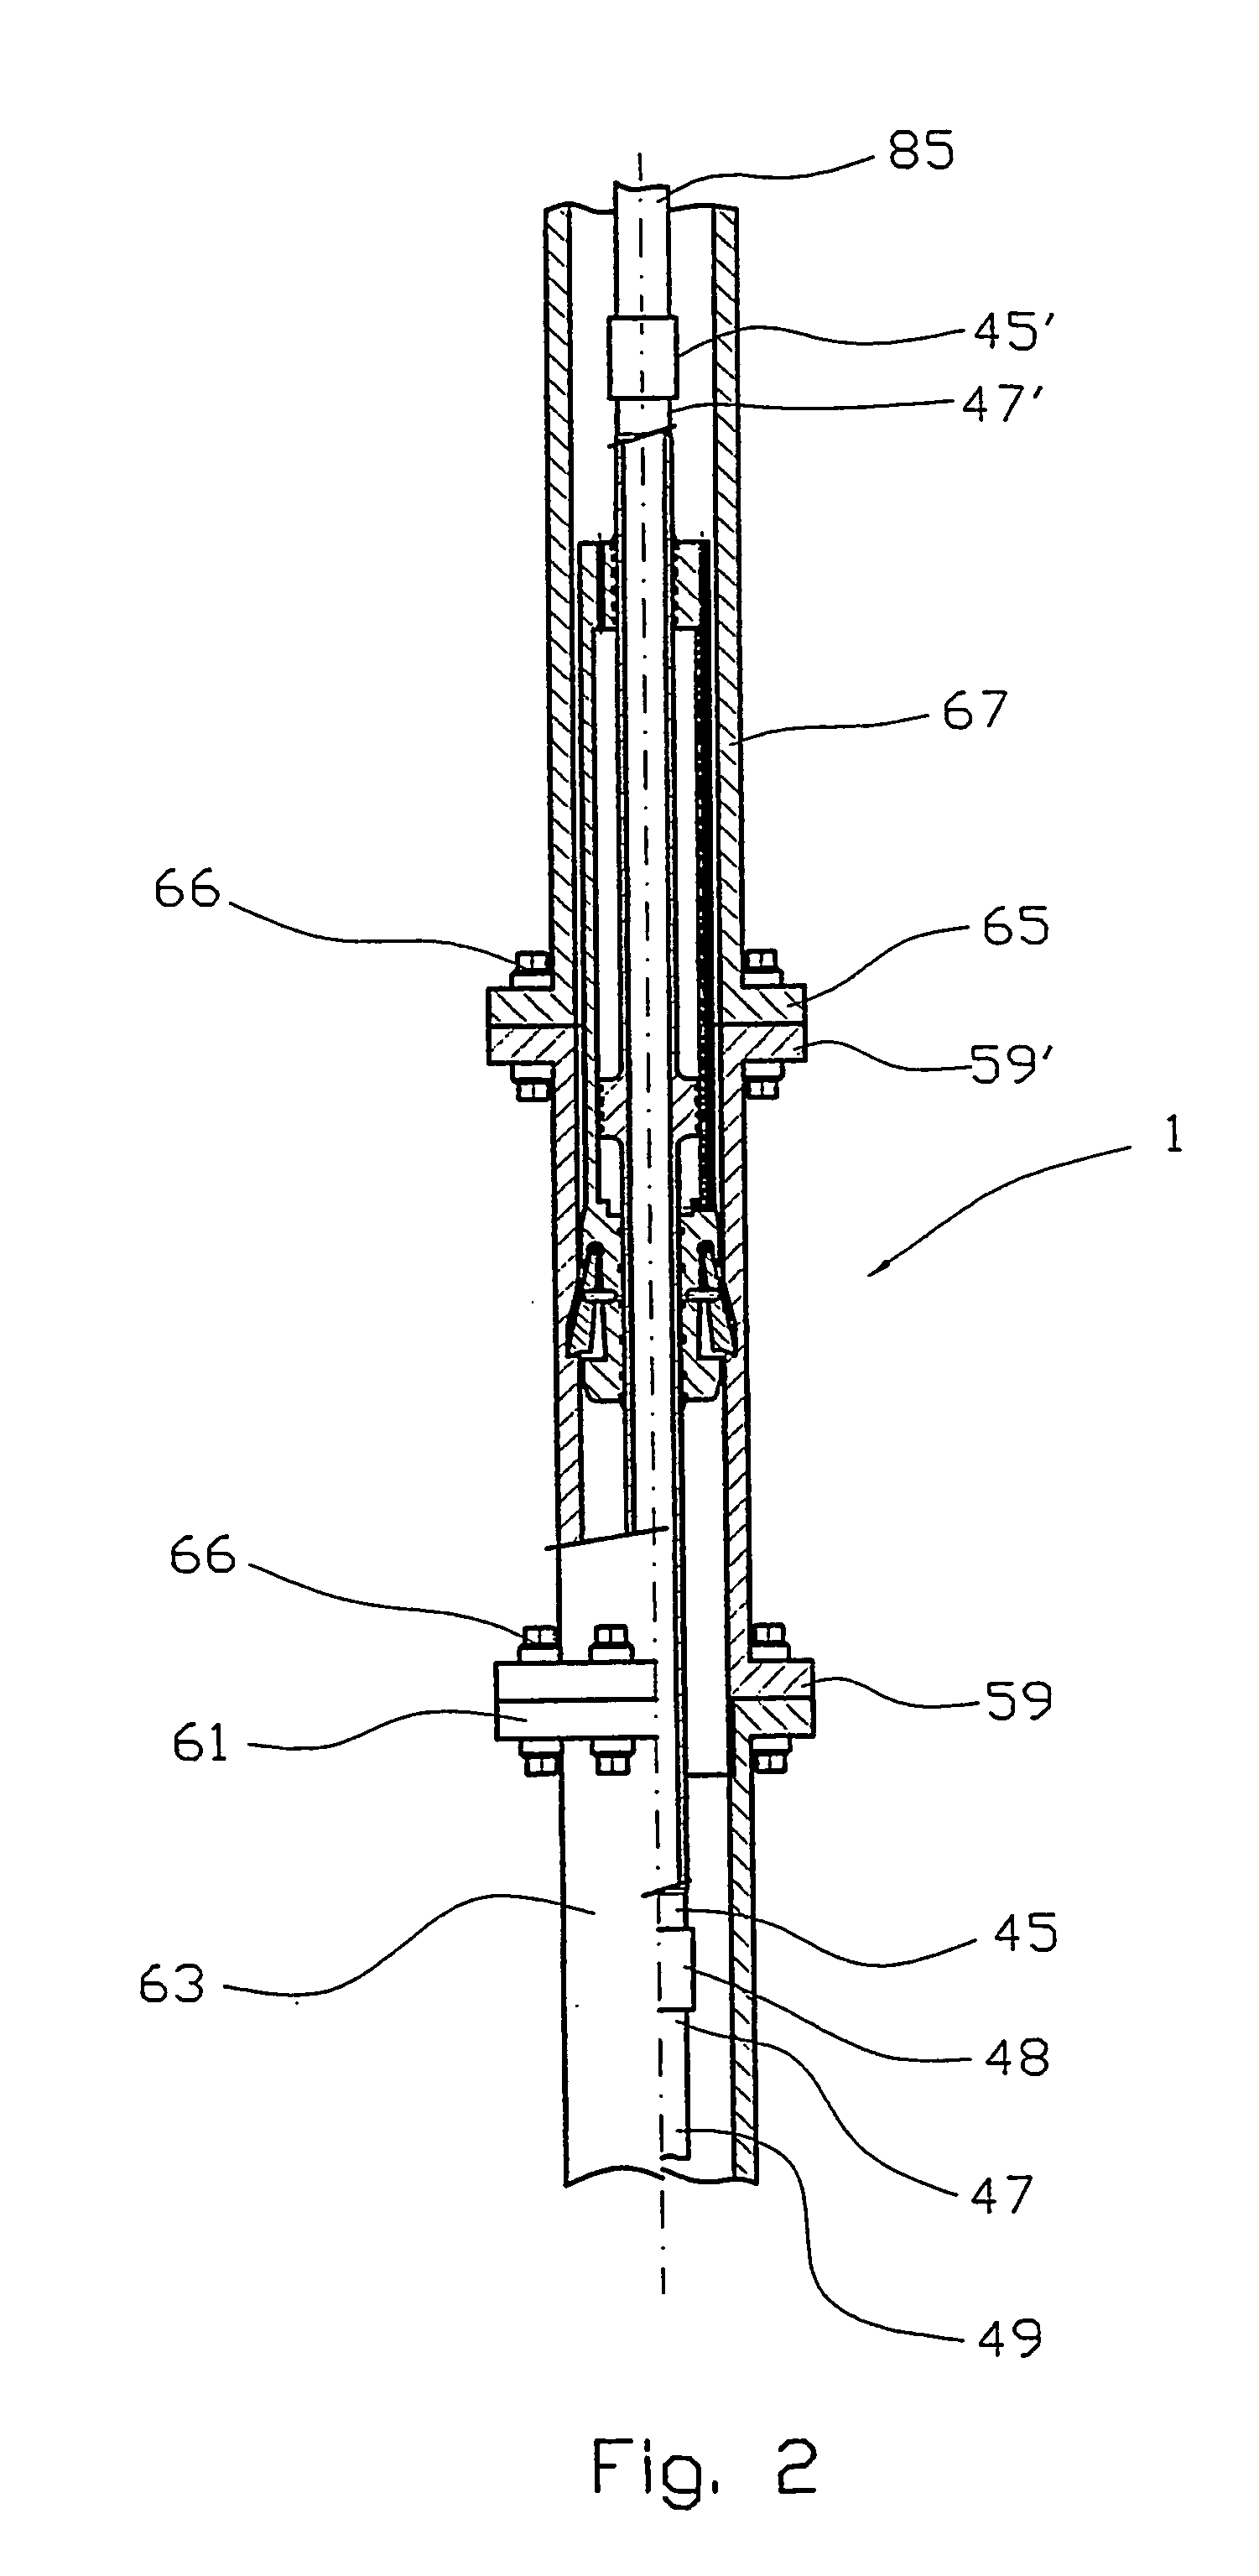 Tensioning system for production tubing in a riser at a floating installation for hydrocarbon production